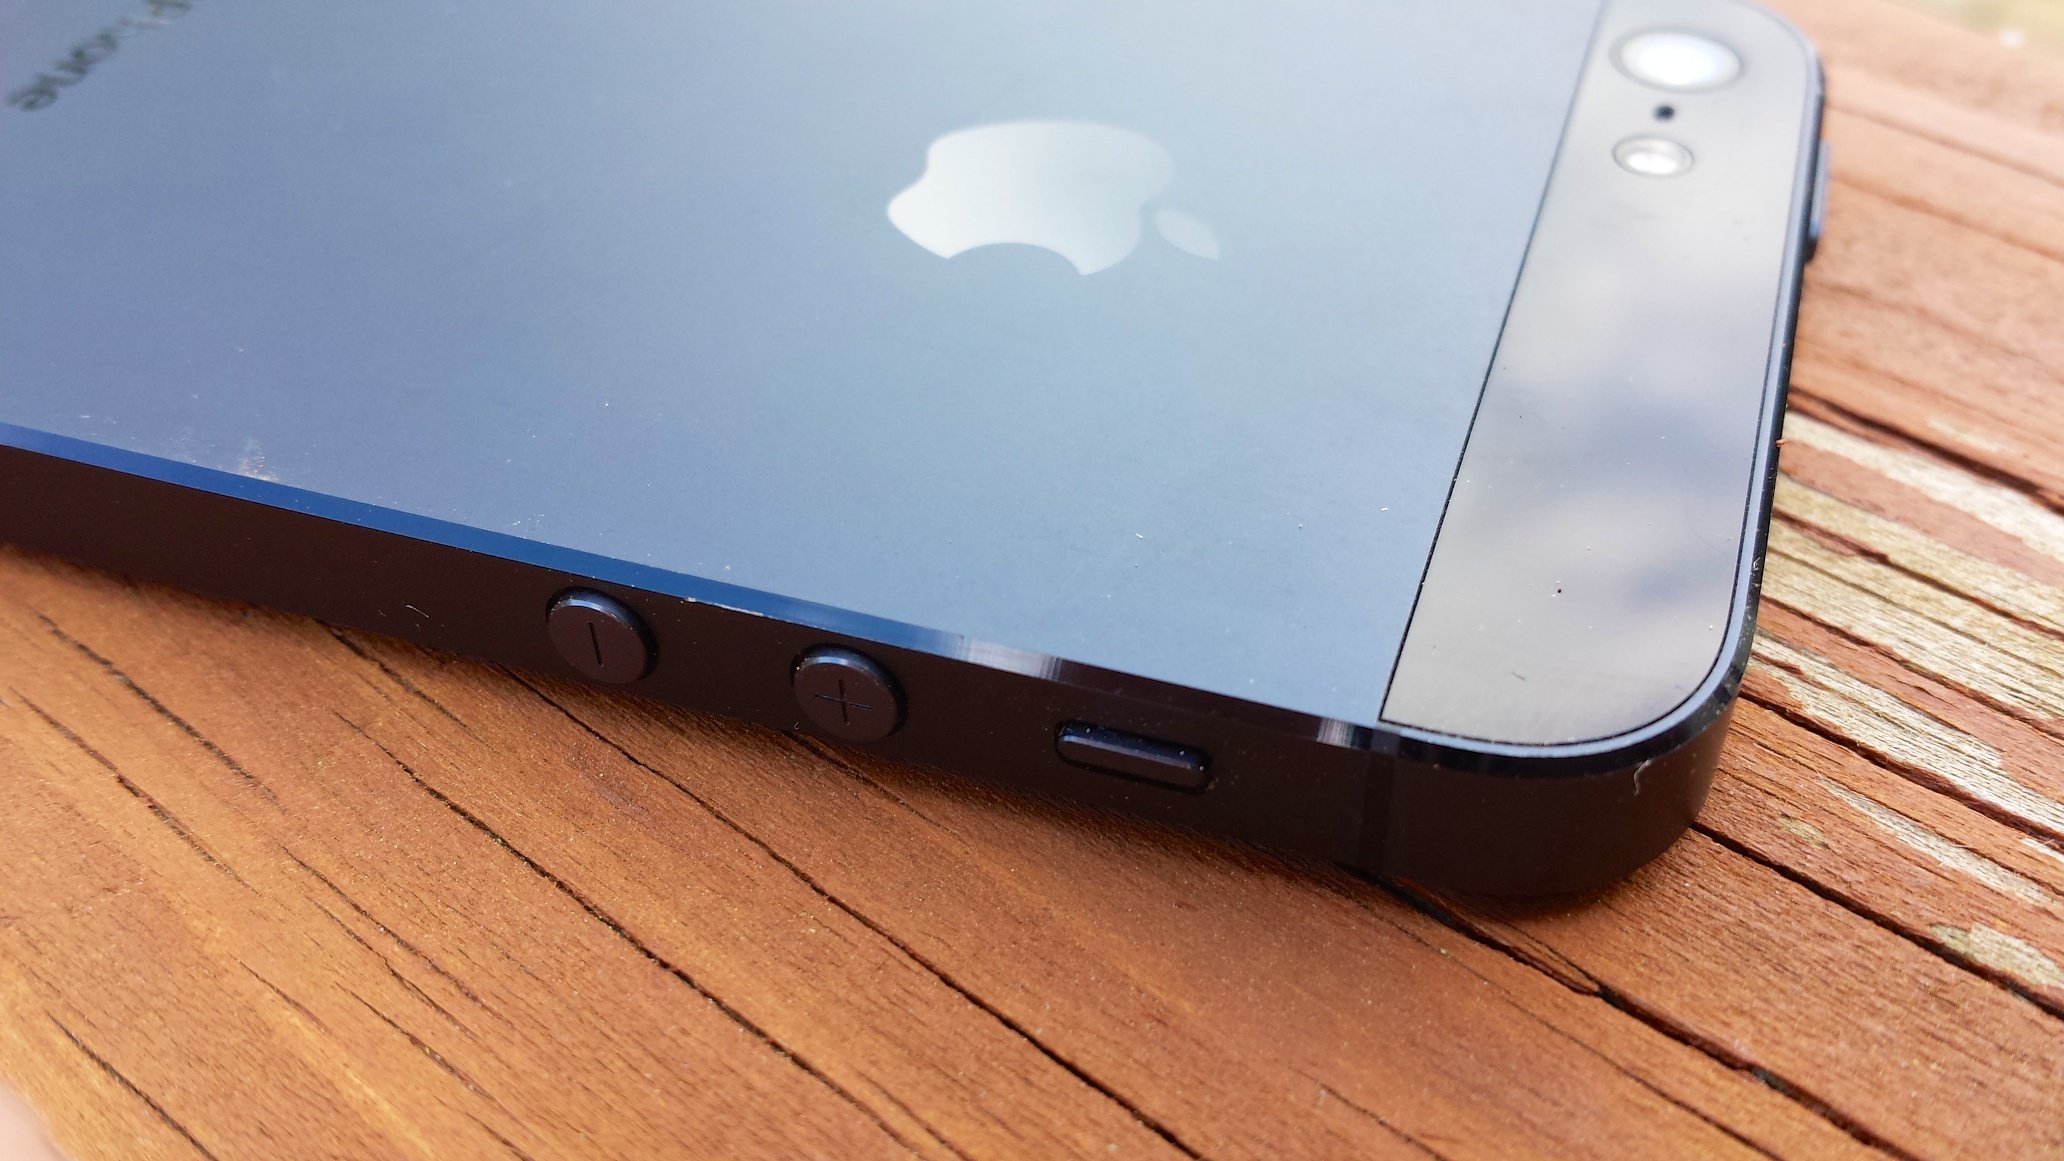 The iPhone 5 scratches easily, and the iPhone 5S may as well.